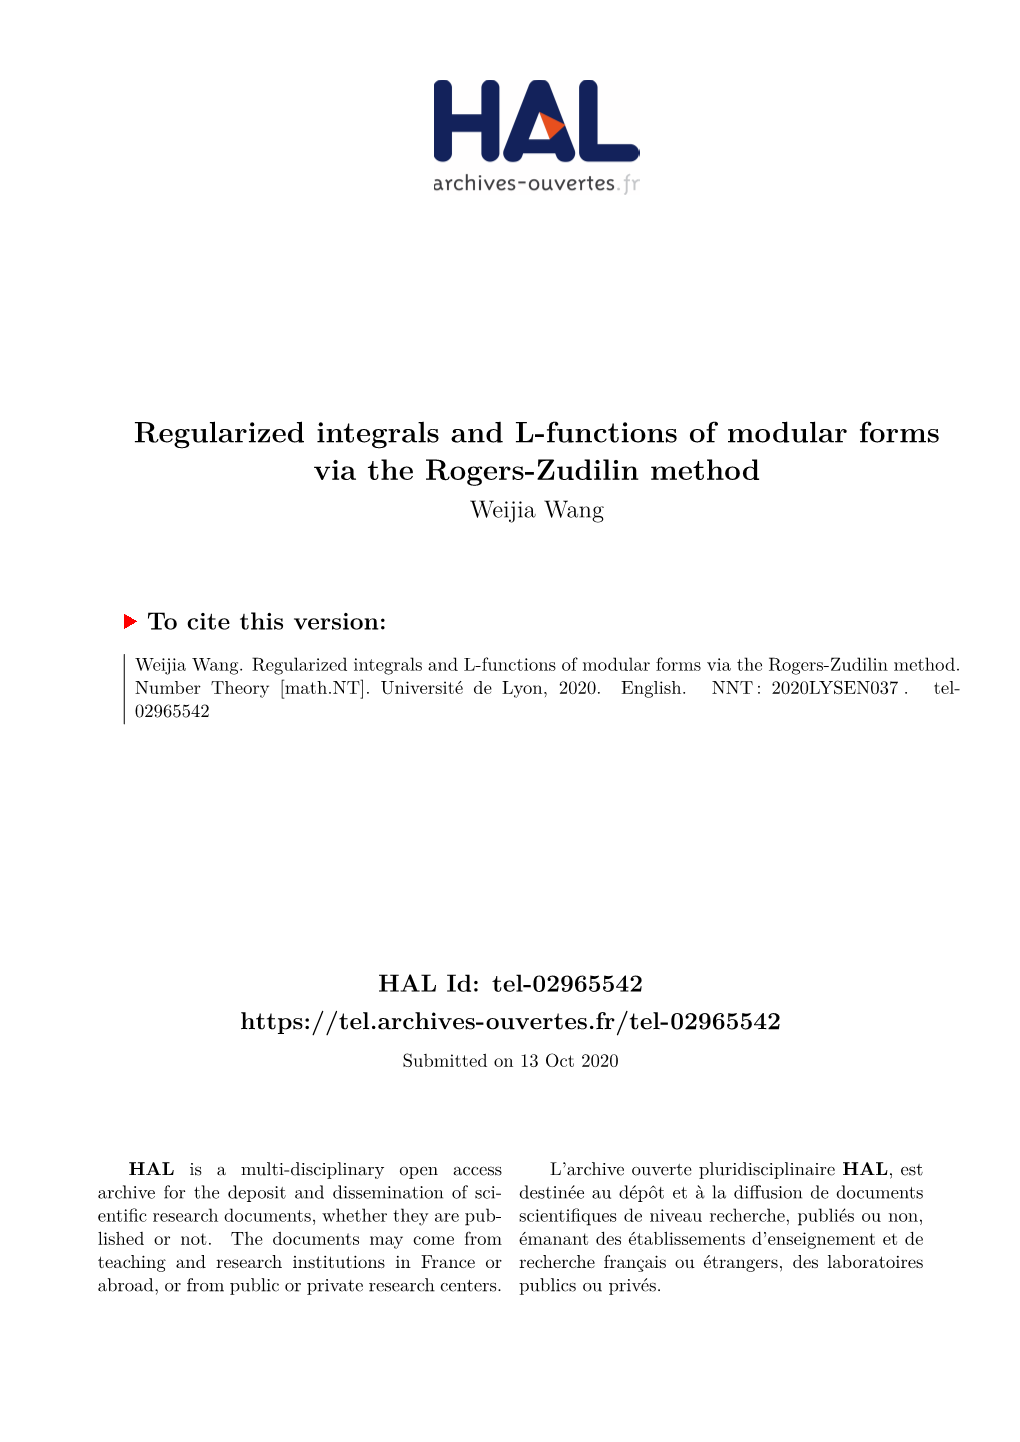 Regularized Integrals and L-Functions of Modular Forms Via the Rogers-Zudilin Method Weijia Wang